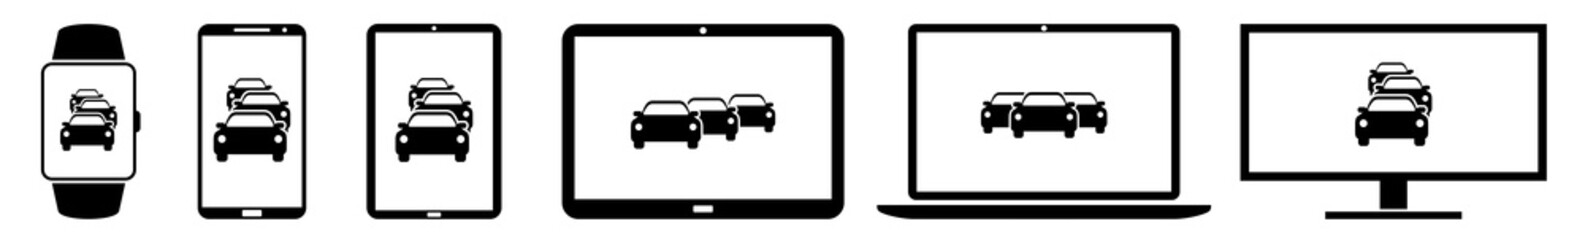 Display Car, Automobile, Automotive, Traffic, Rush, Hour, Jam Icon Devices Set | Web Screen Device Online | Laptop Vector Illustration | Mobile Phone | PC Computer Smartphone Tablet Sign Isolated